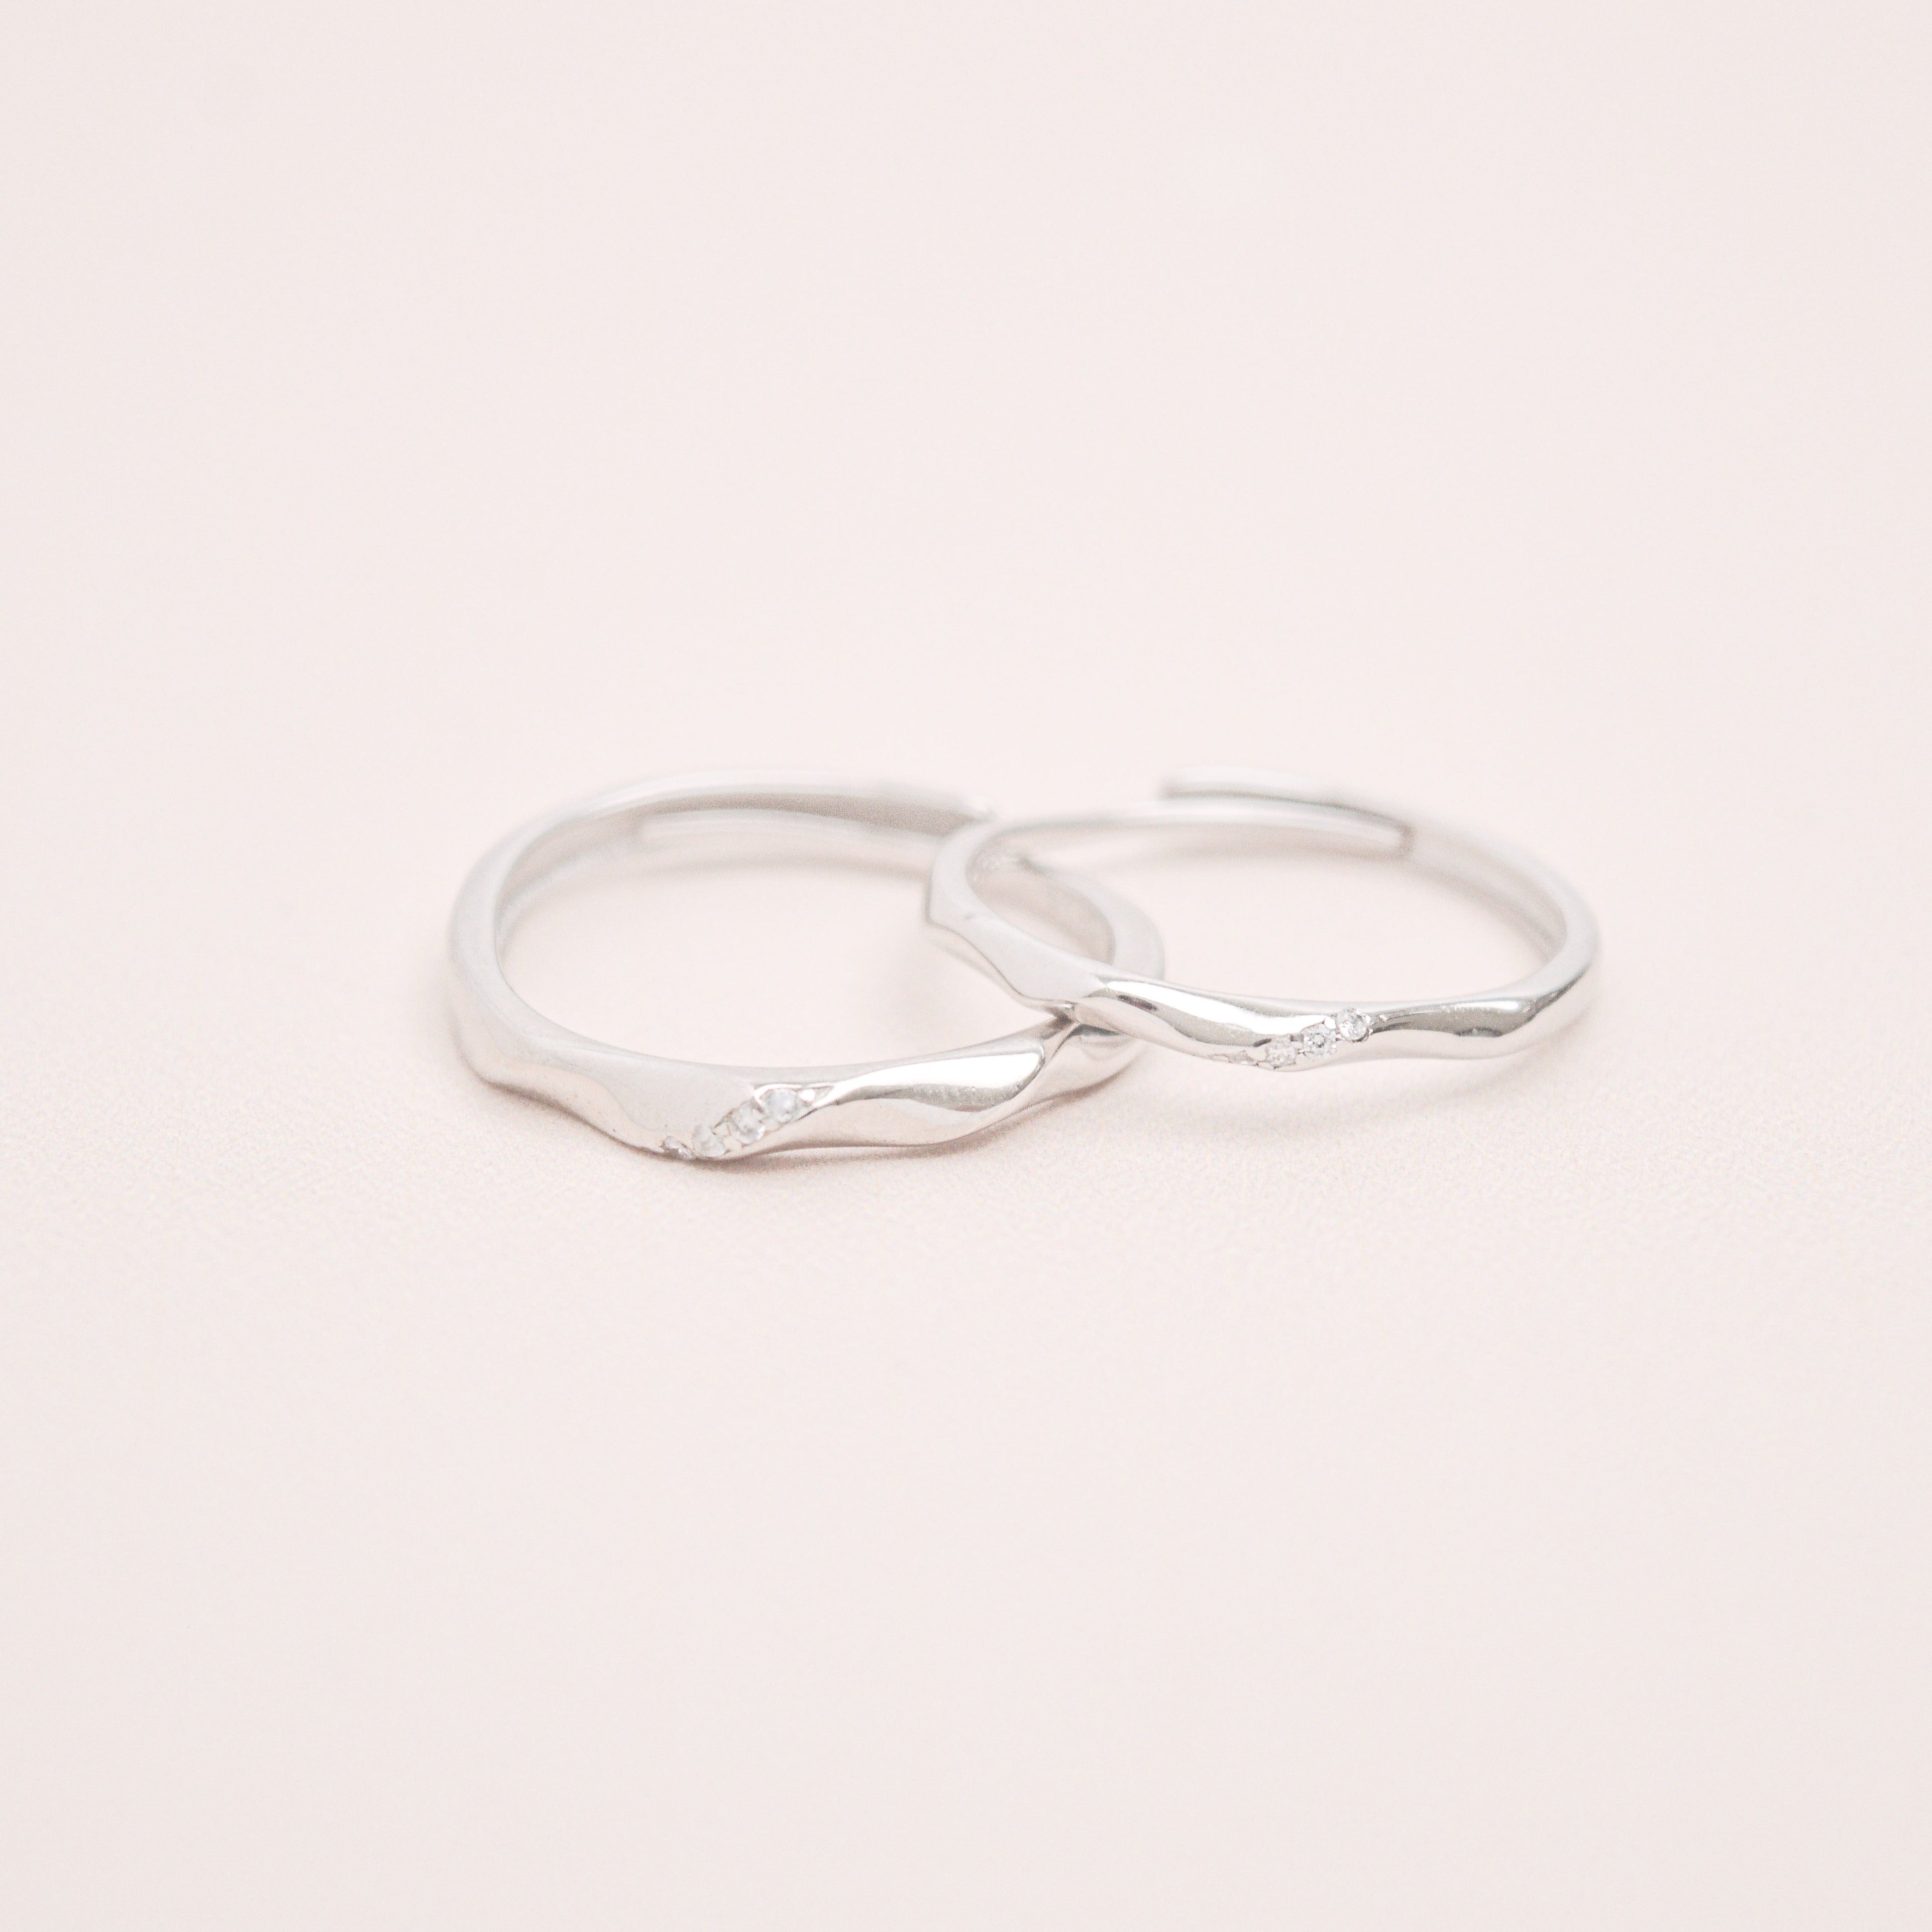 Adjustable Wave Couple Ring